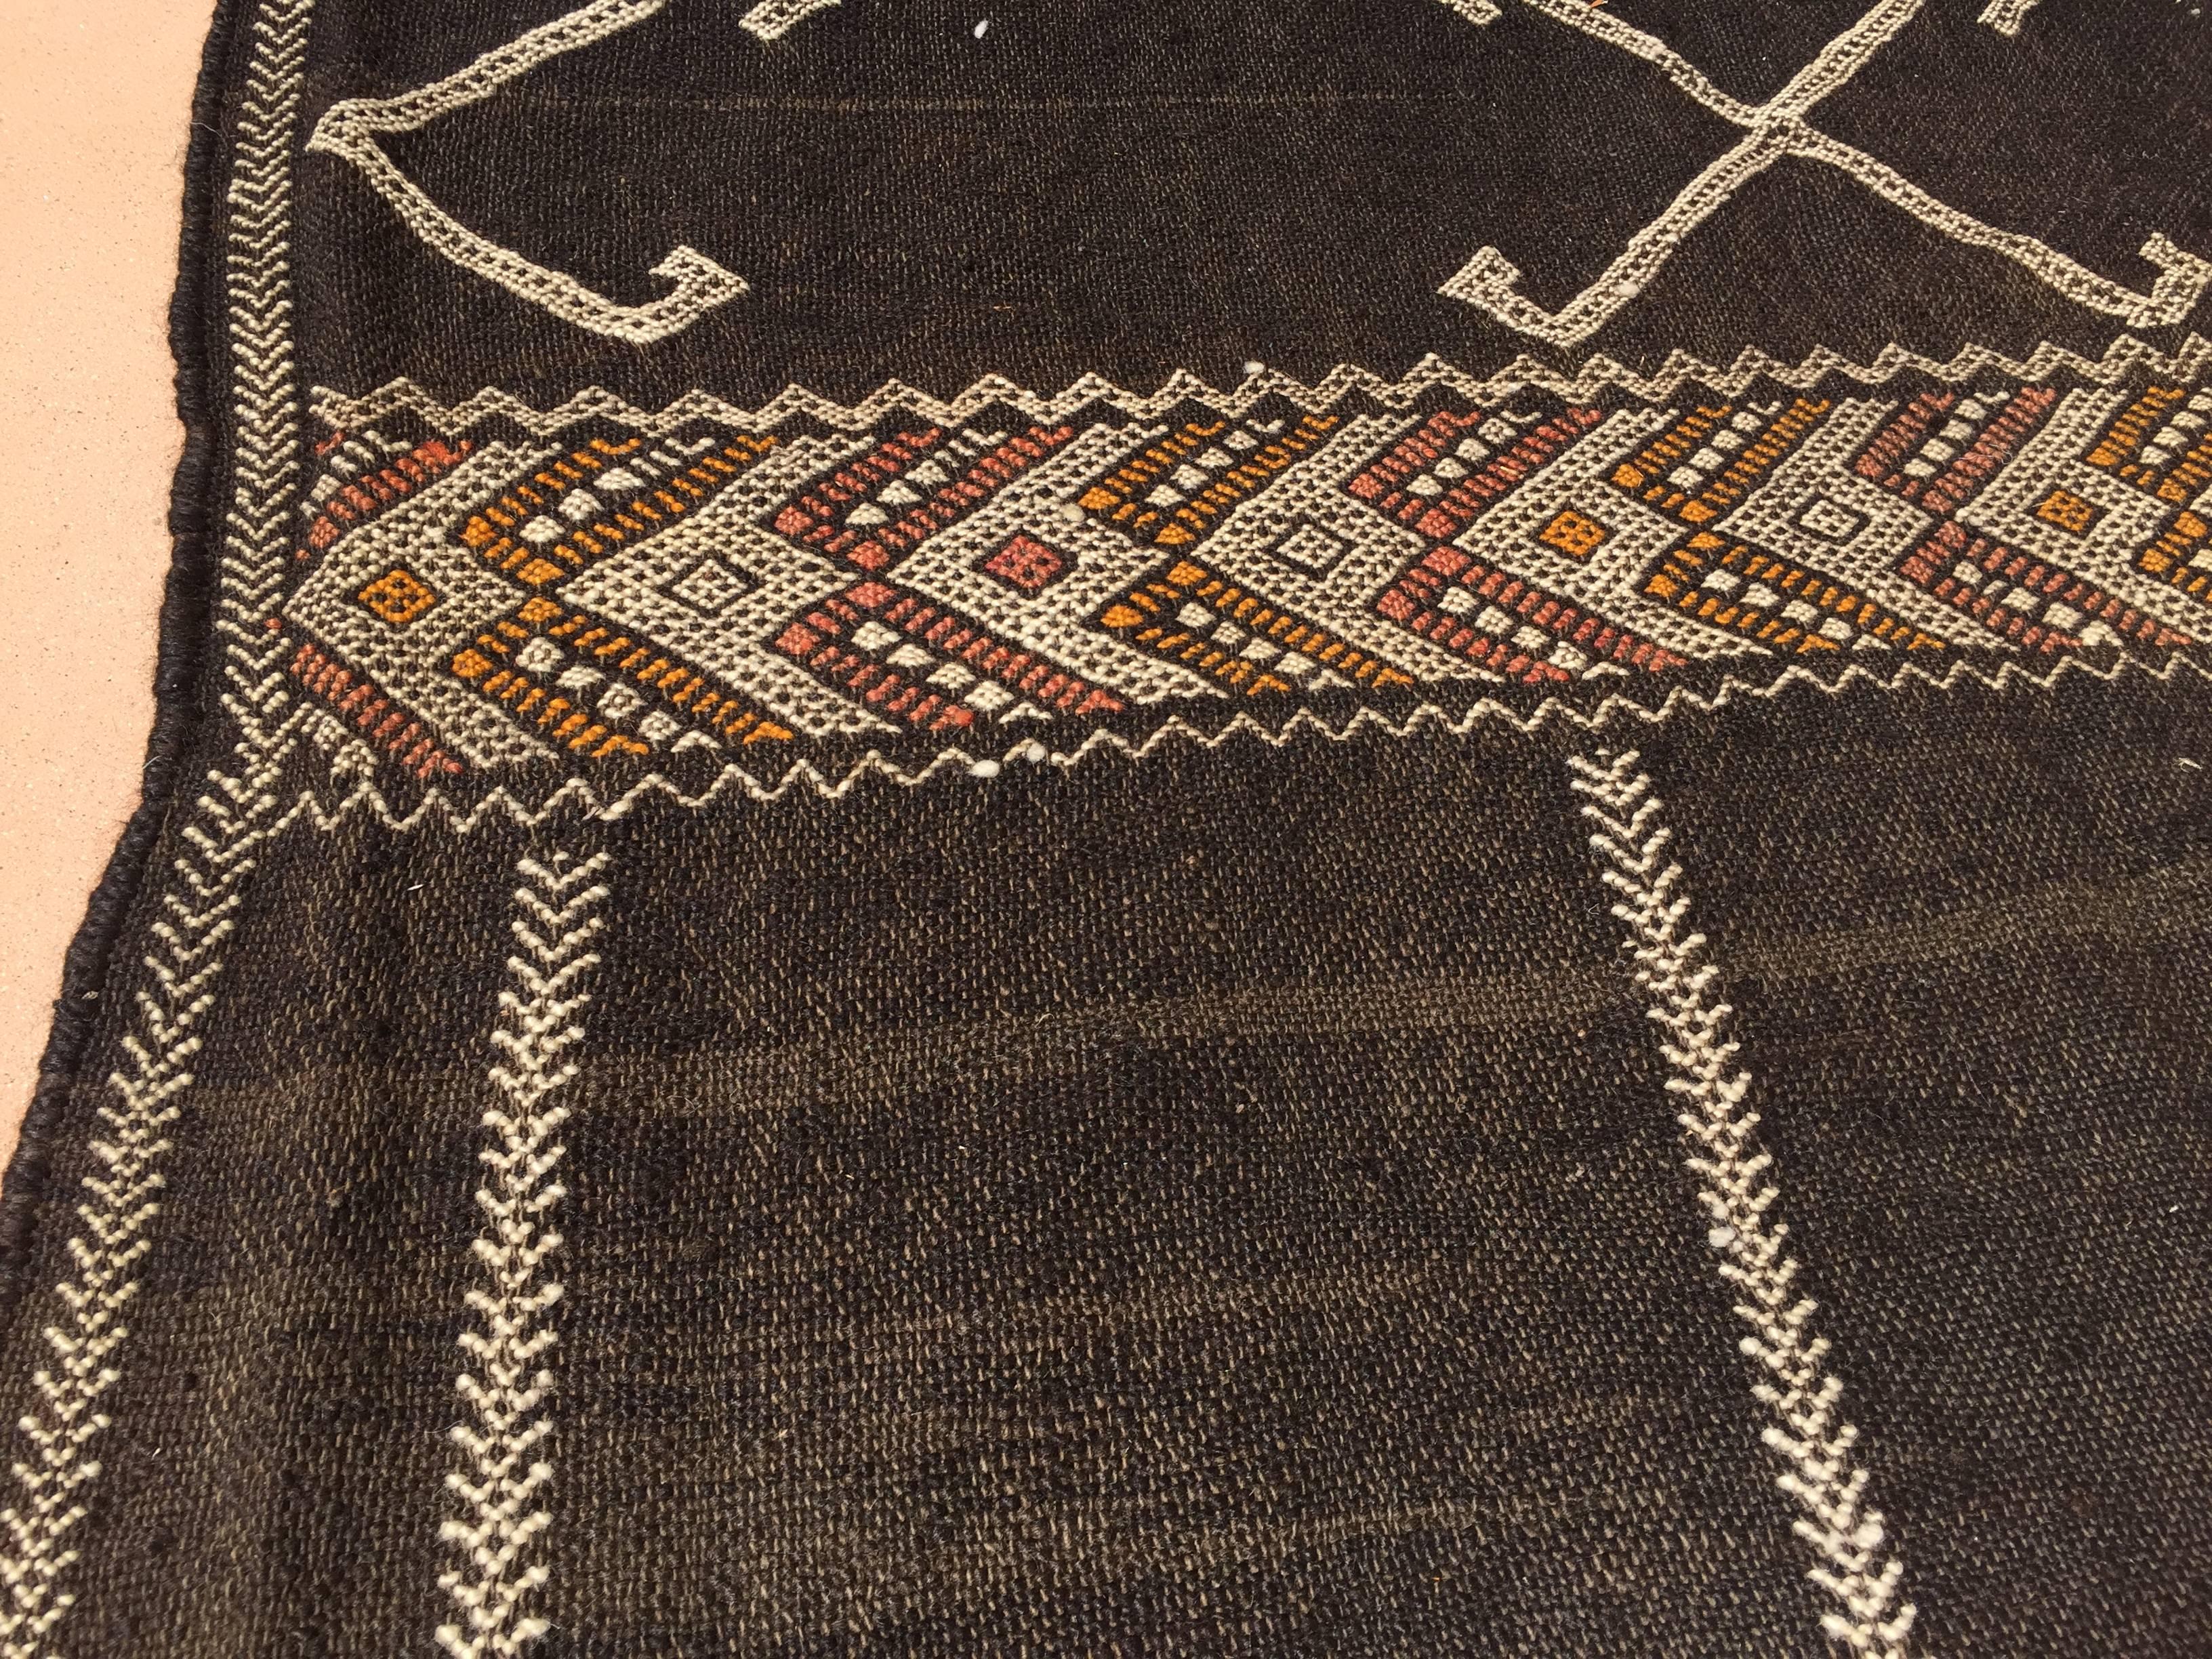 Hand-Woven Vintage Moroccan African Nomadic Tribal Rug